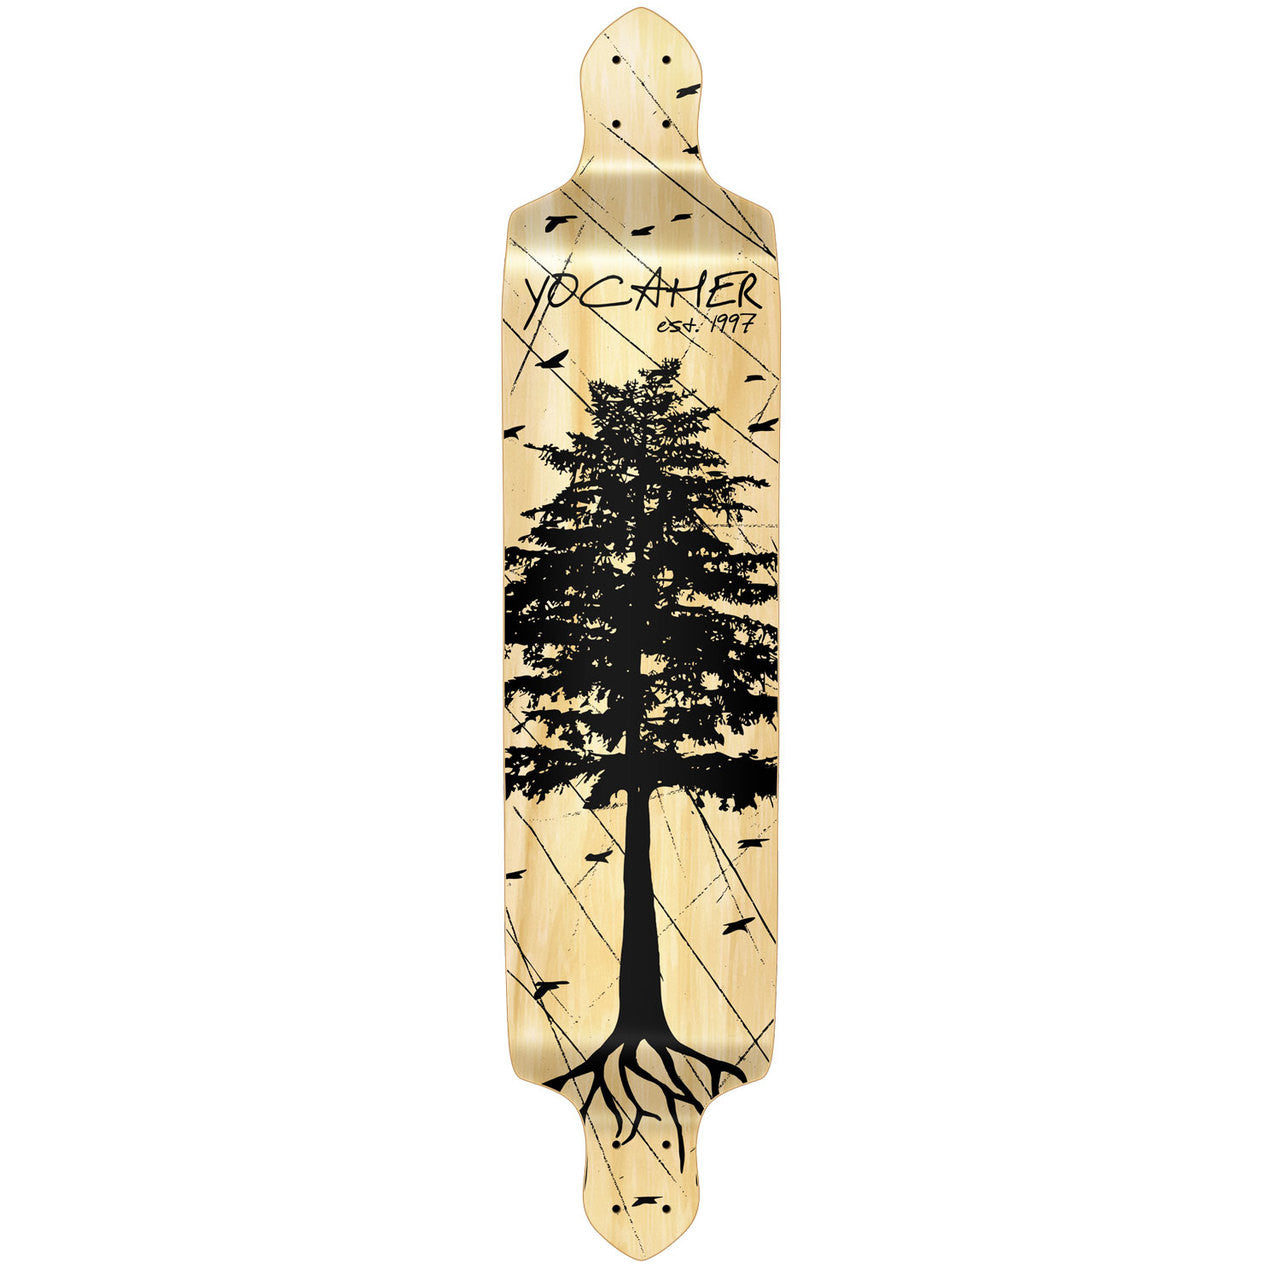 Yocaher Drop Down Longboard Deck - In the Pines : Natural